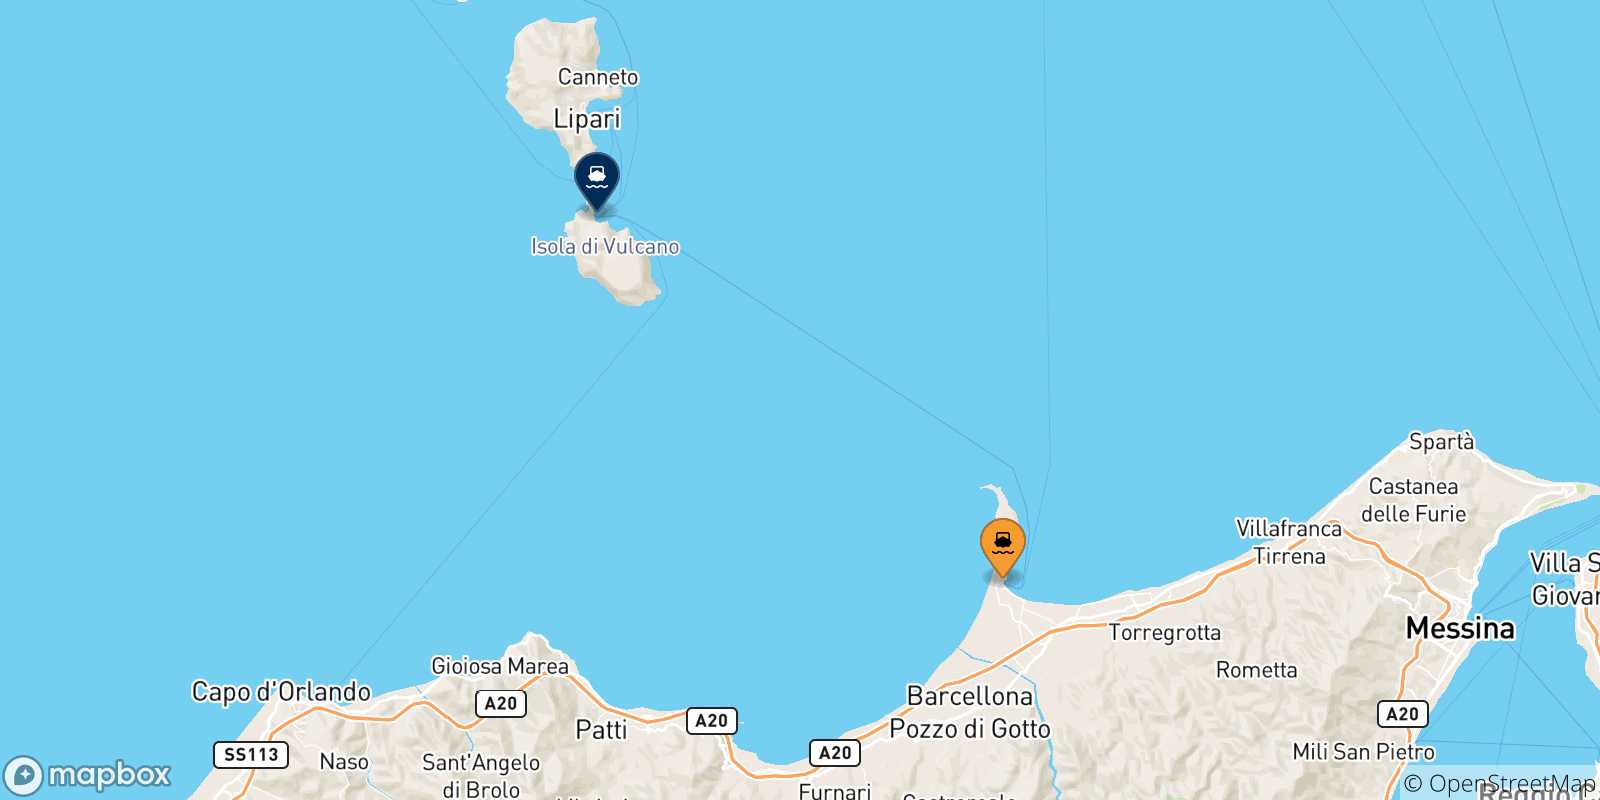 Map of the possible routes between Sicily and Vulcano